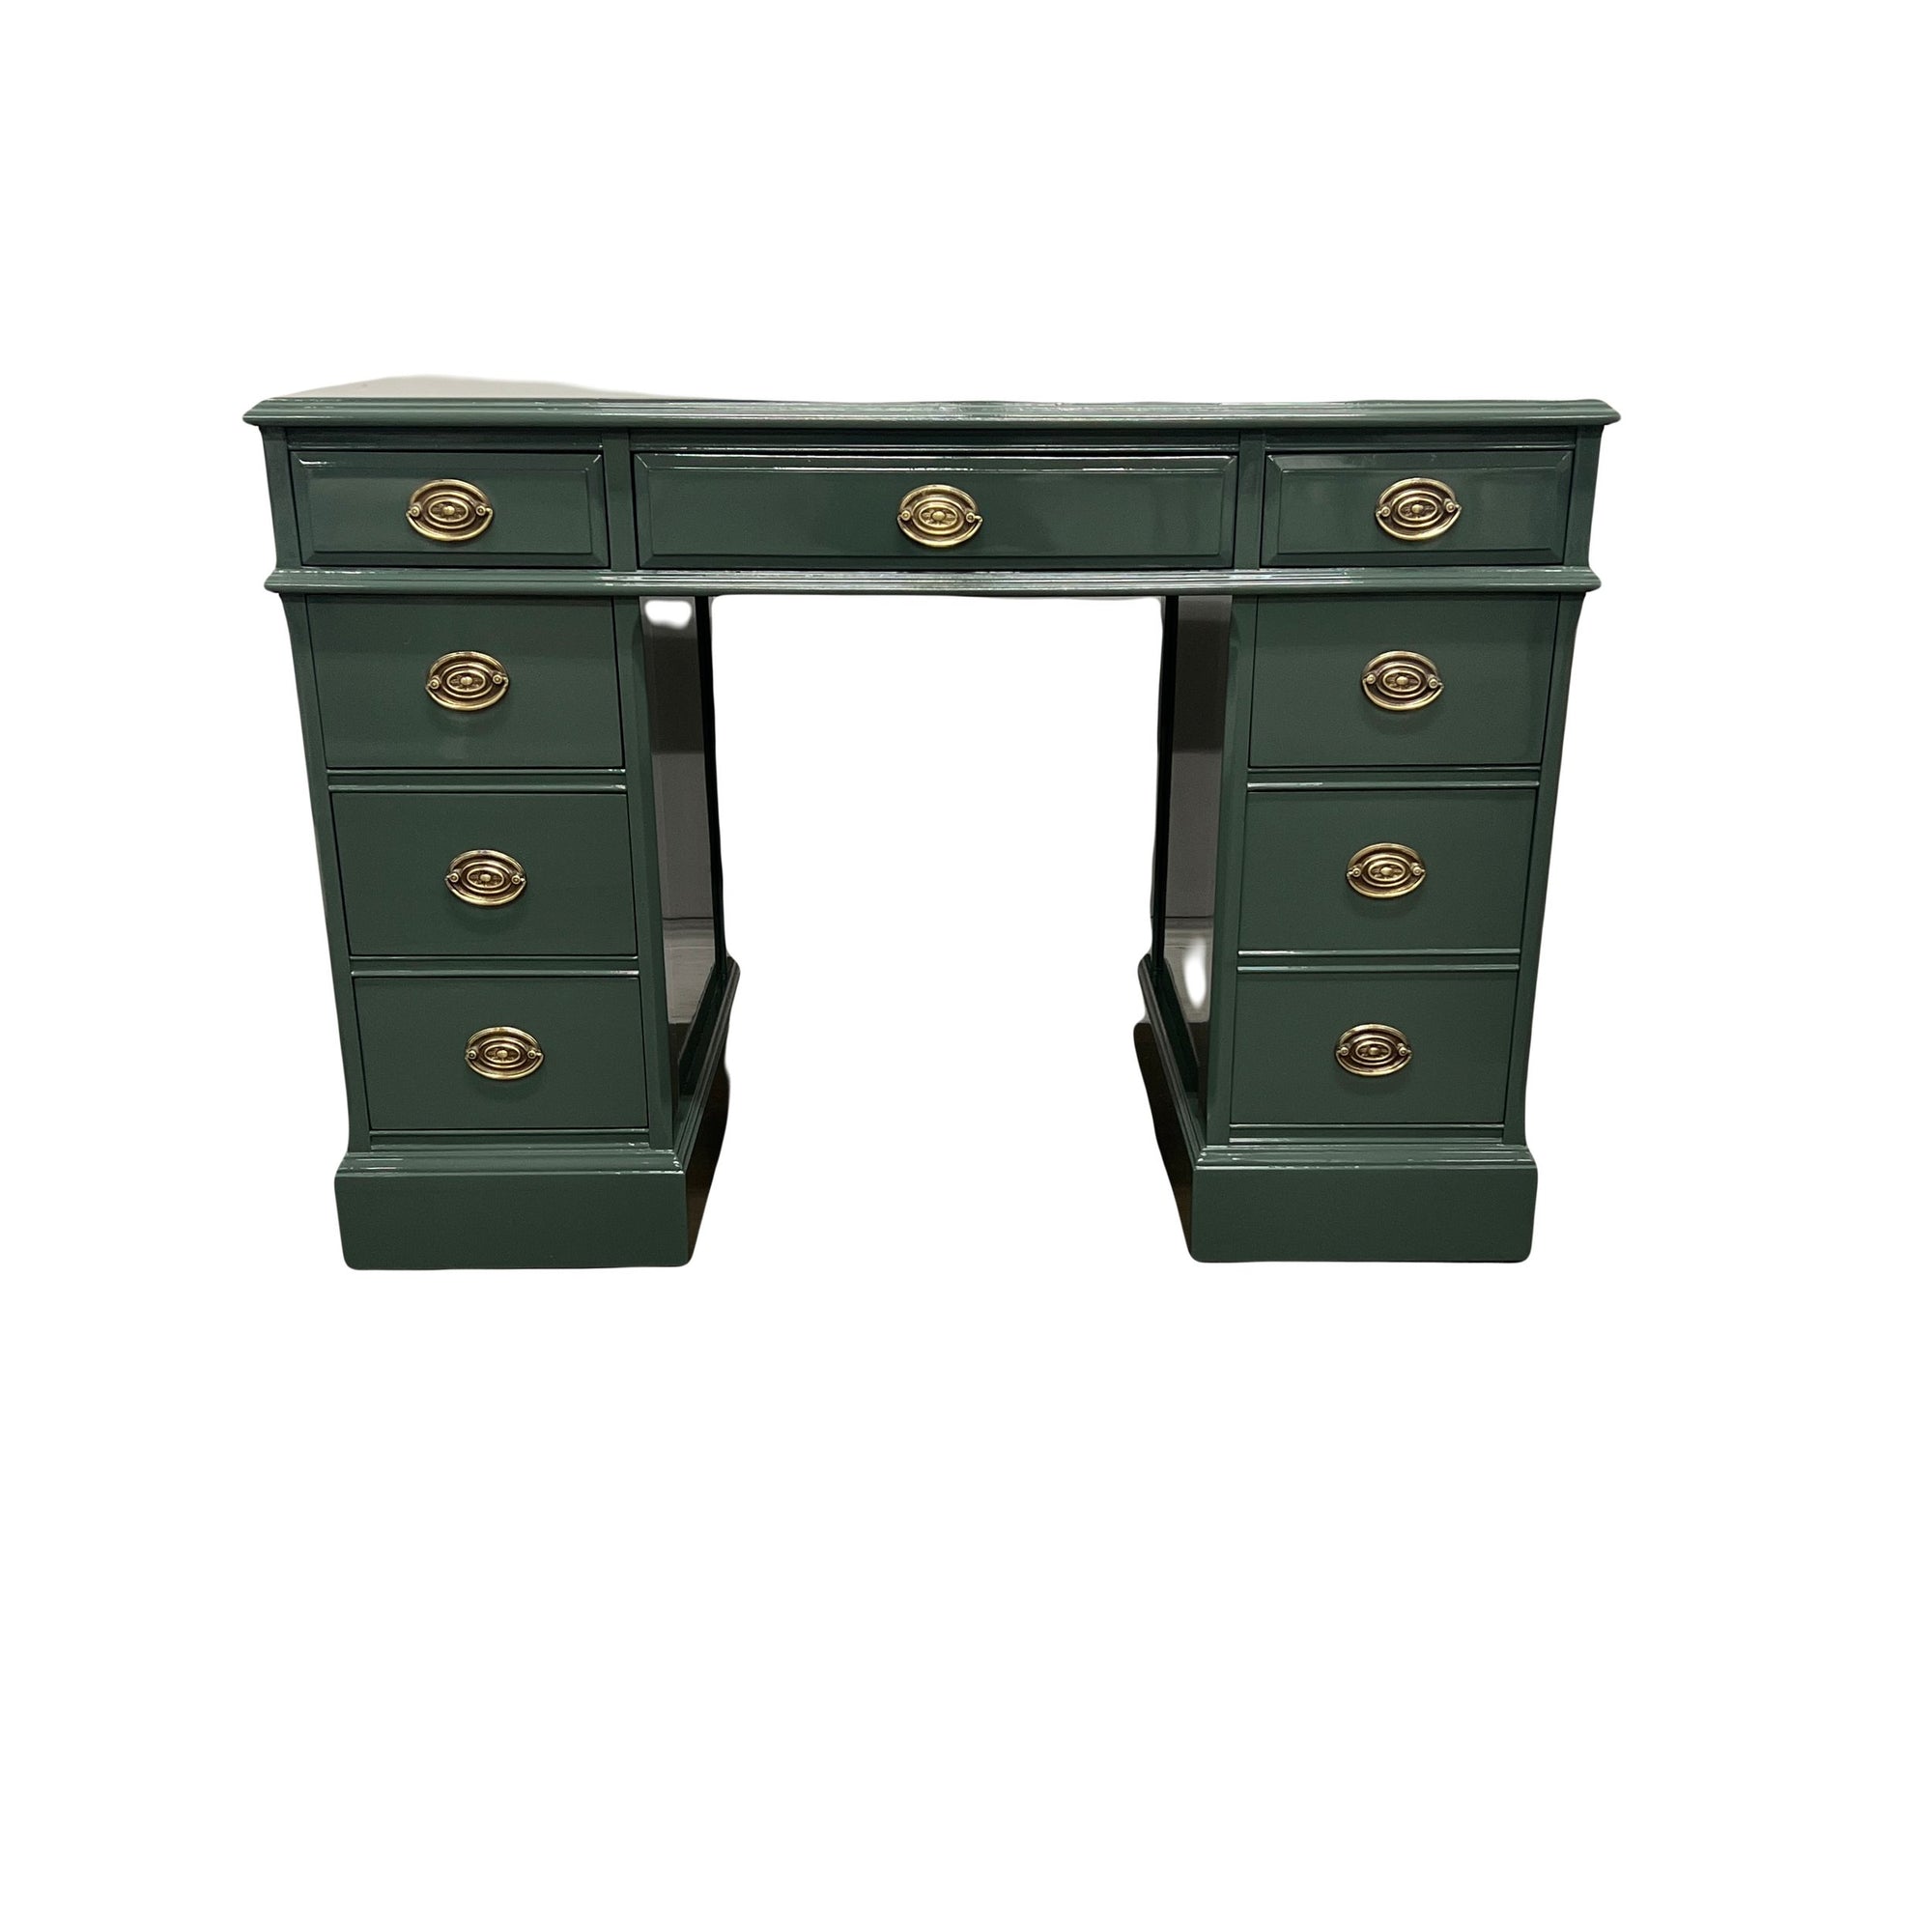 SOLD: Green Lacquered Desk